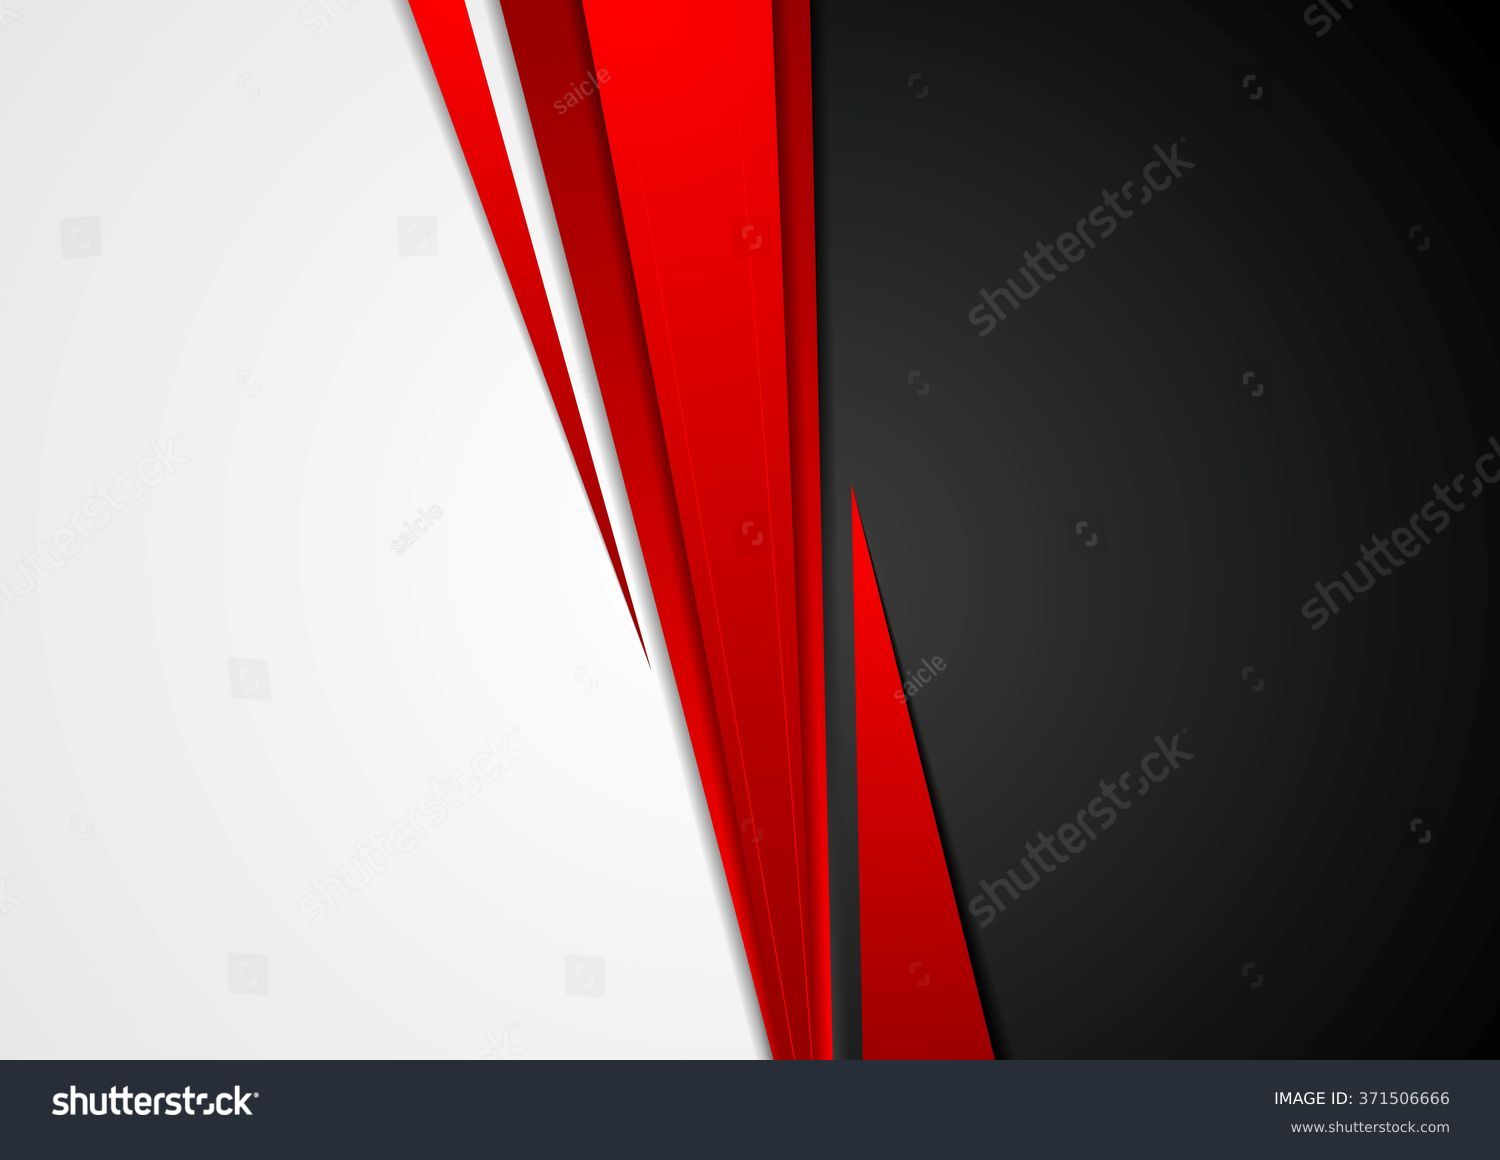 Corporate concept red black grey contrast background. Vector graphic design #371506666